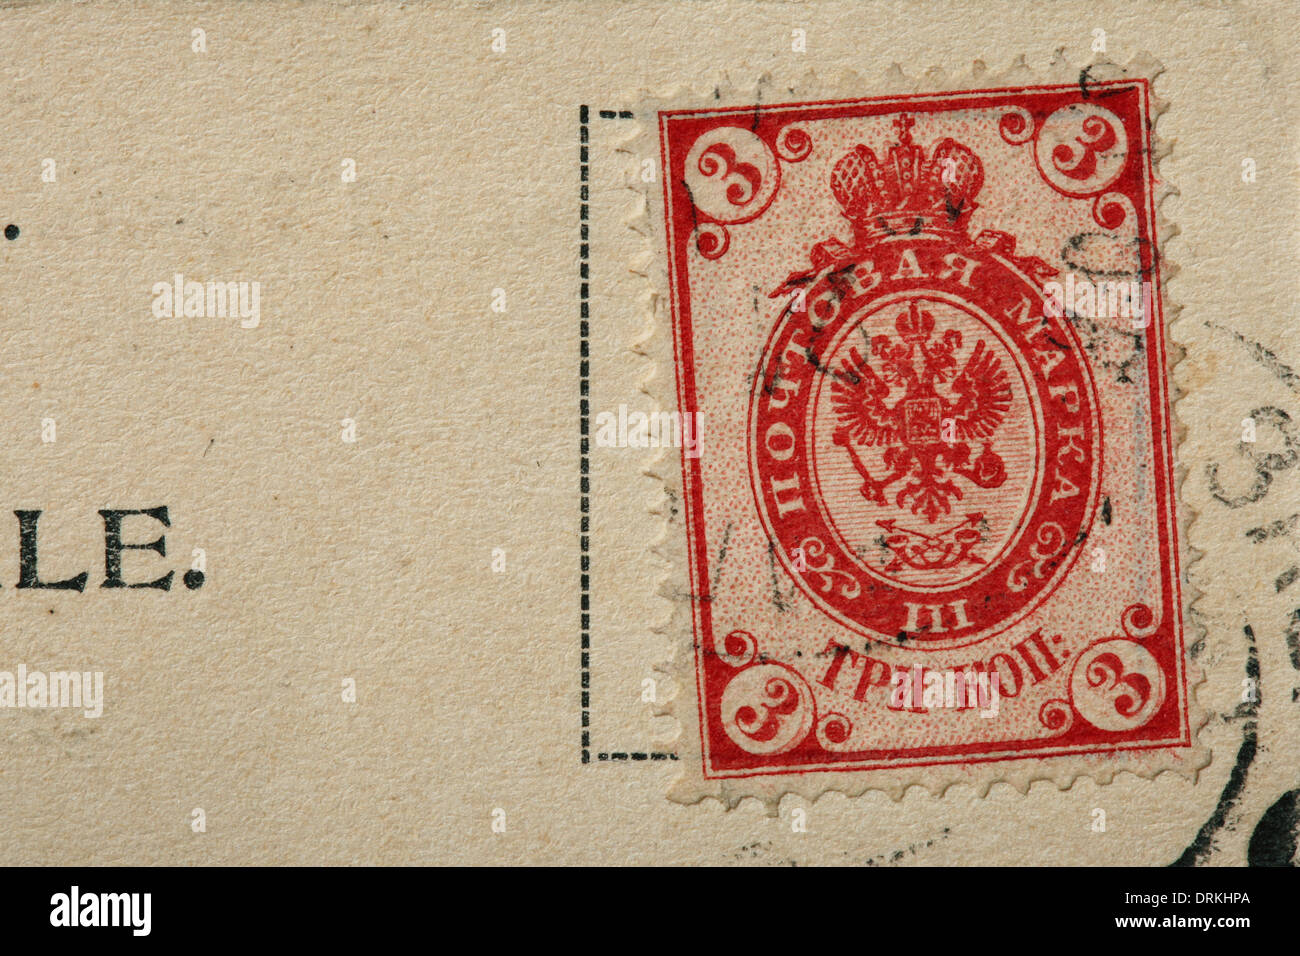 Russian 3 kopecks postage stamp with a double-headed eagle. Old Russian postcard. Stock Photo